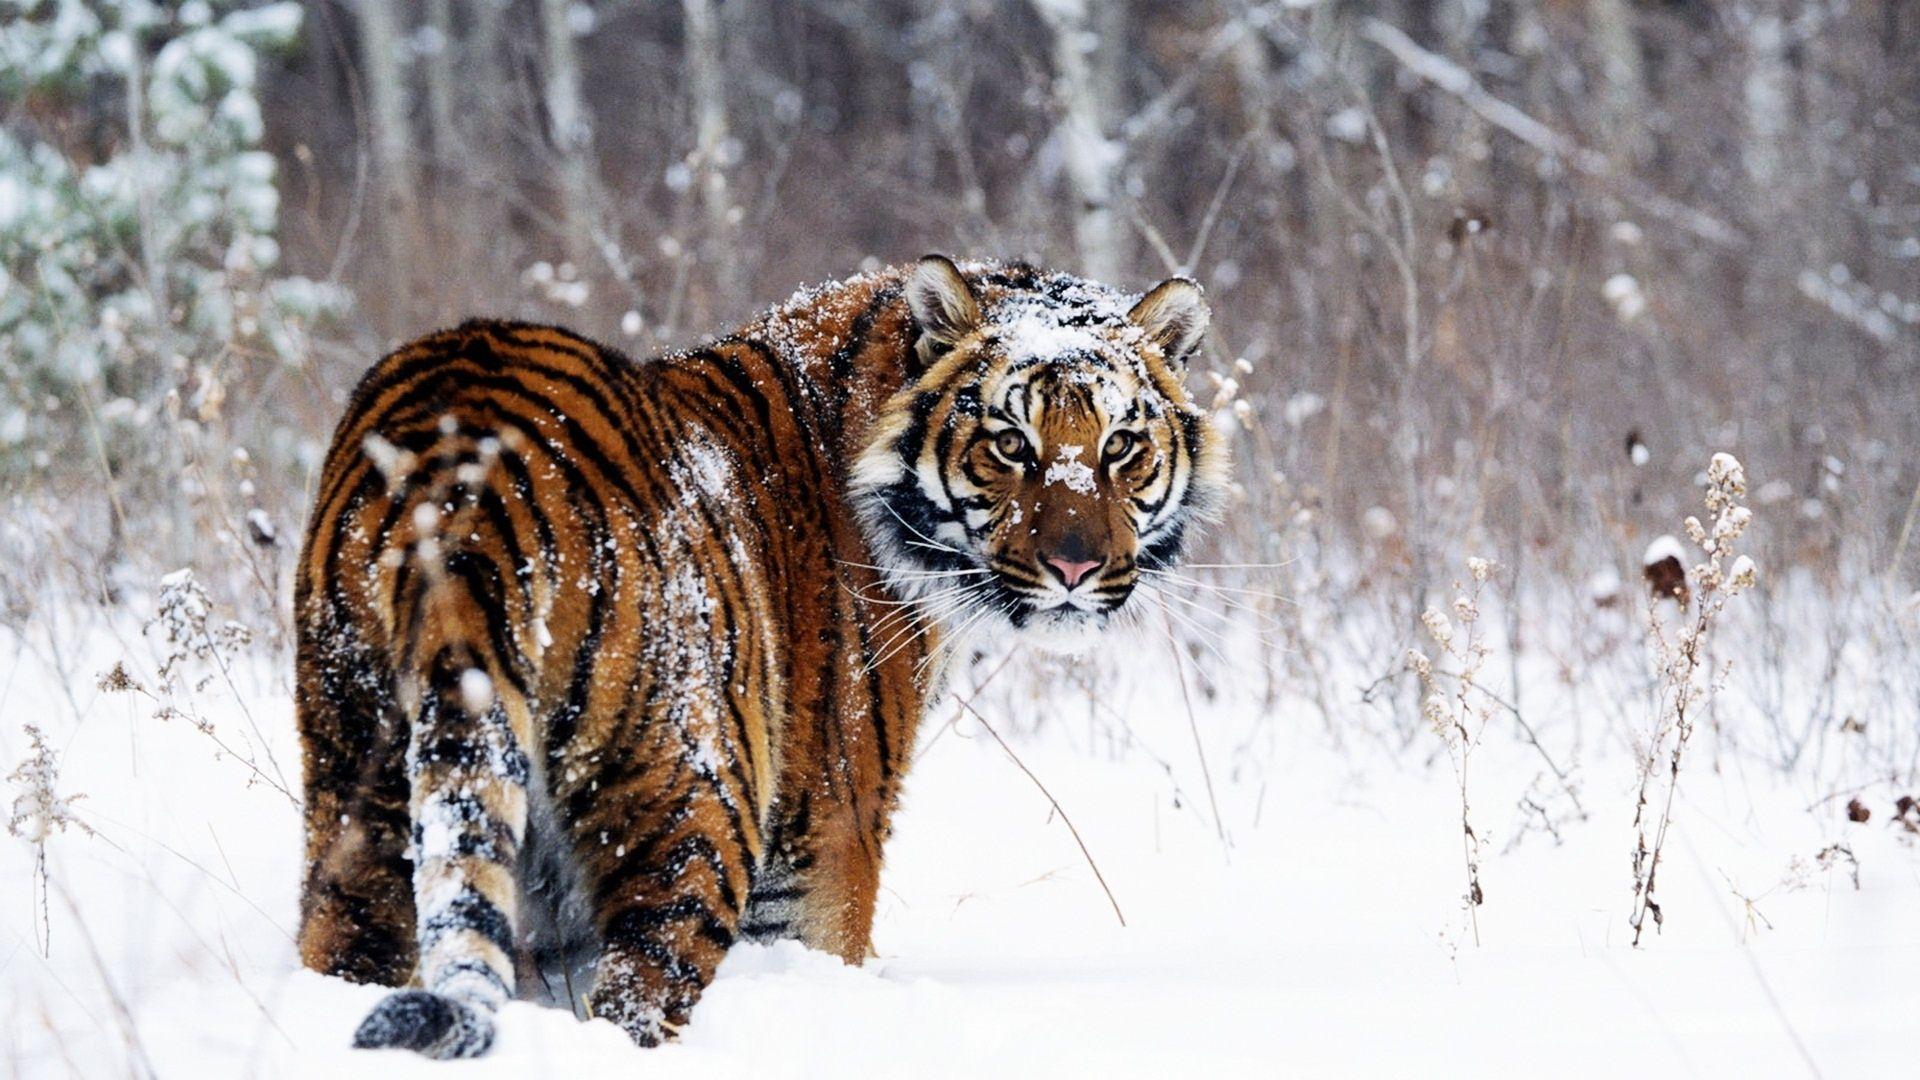 Tiger in Snow Wallpaper in jpg format for free download